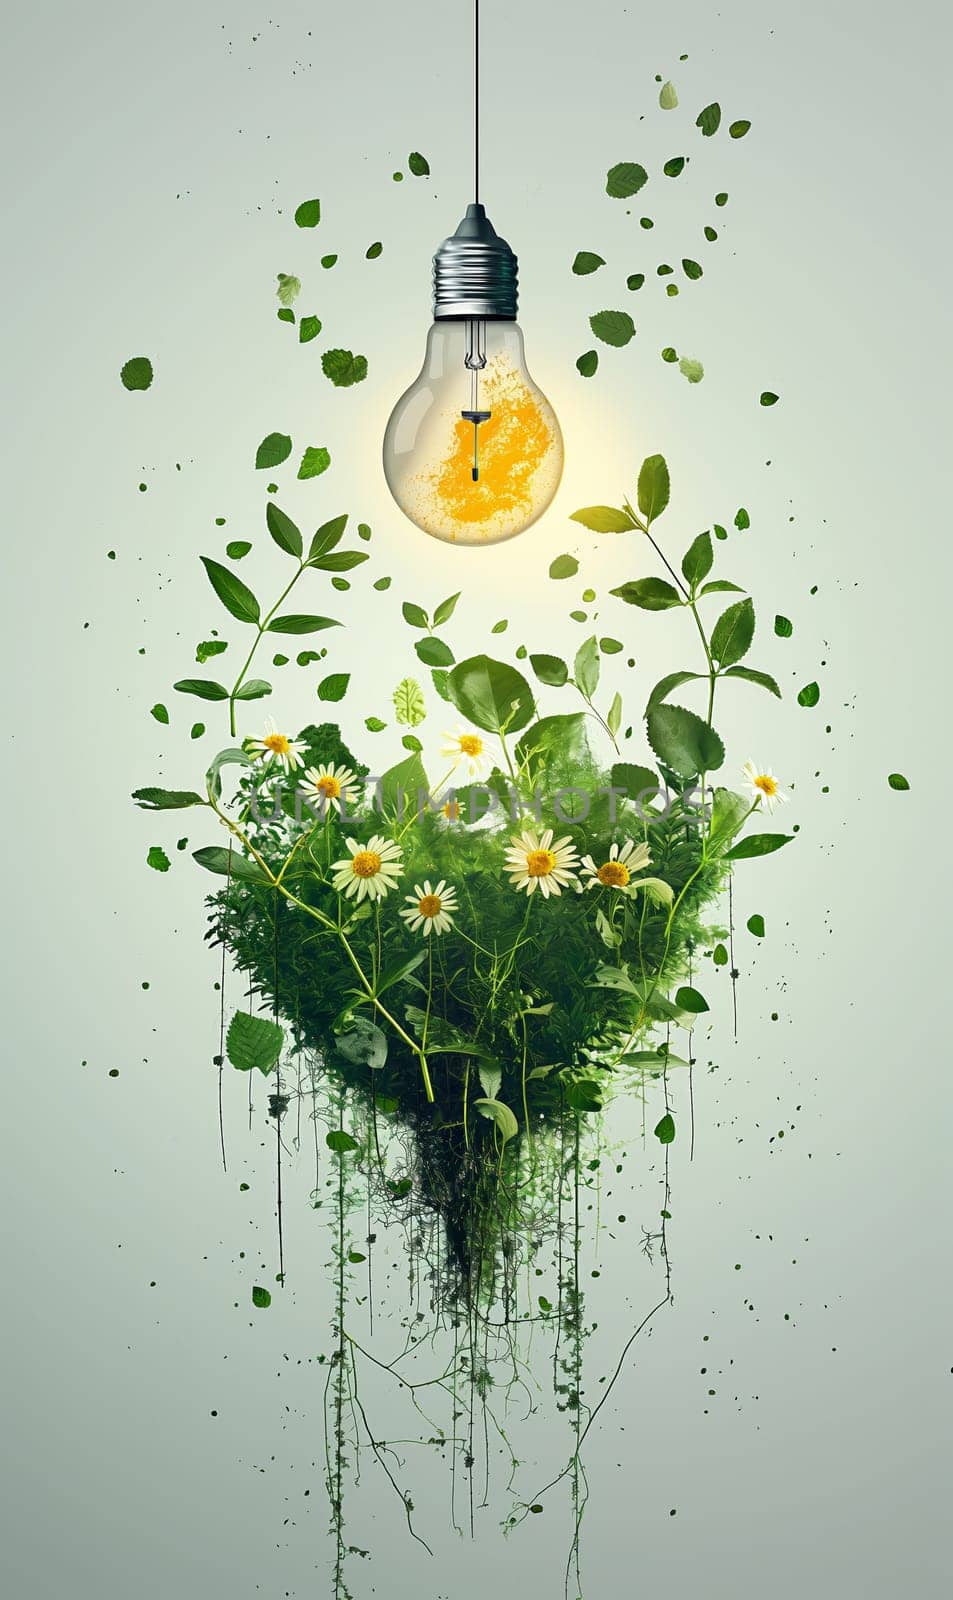 Green energy concept. A light bulb hanging above the plants. by Fischeron